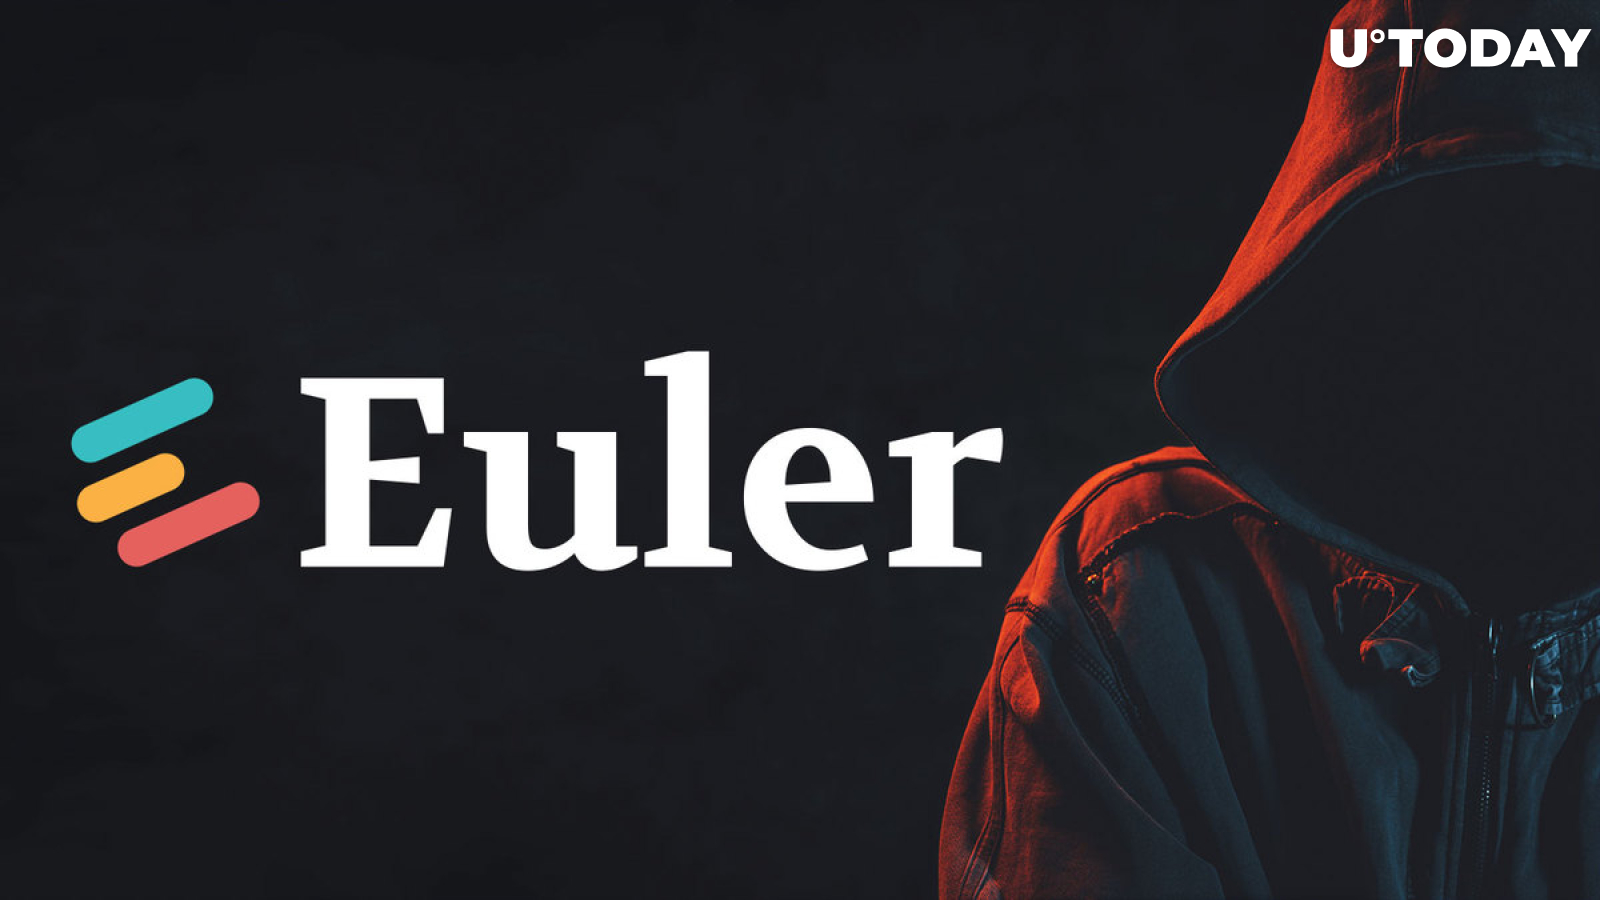 Euler Hacker Gives out Stolen ETH to Random Users, Here's What's Happening